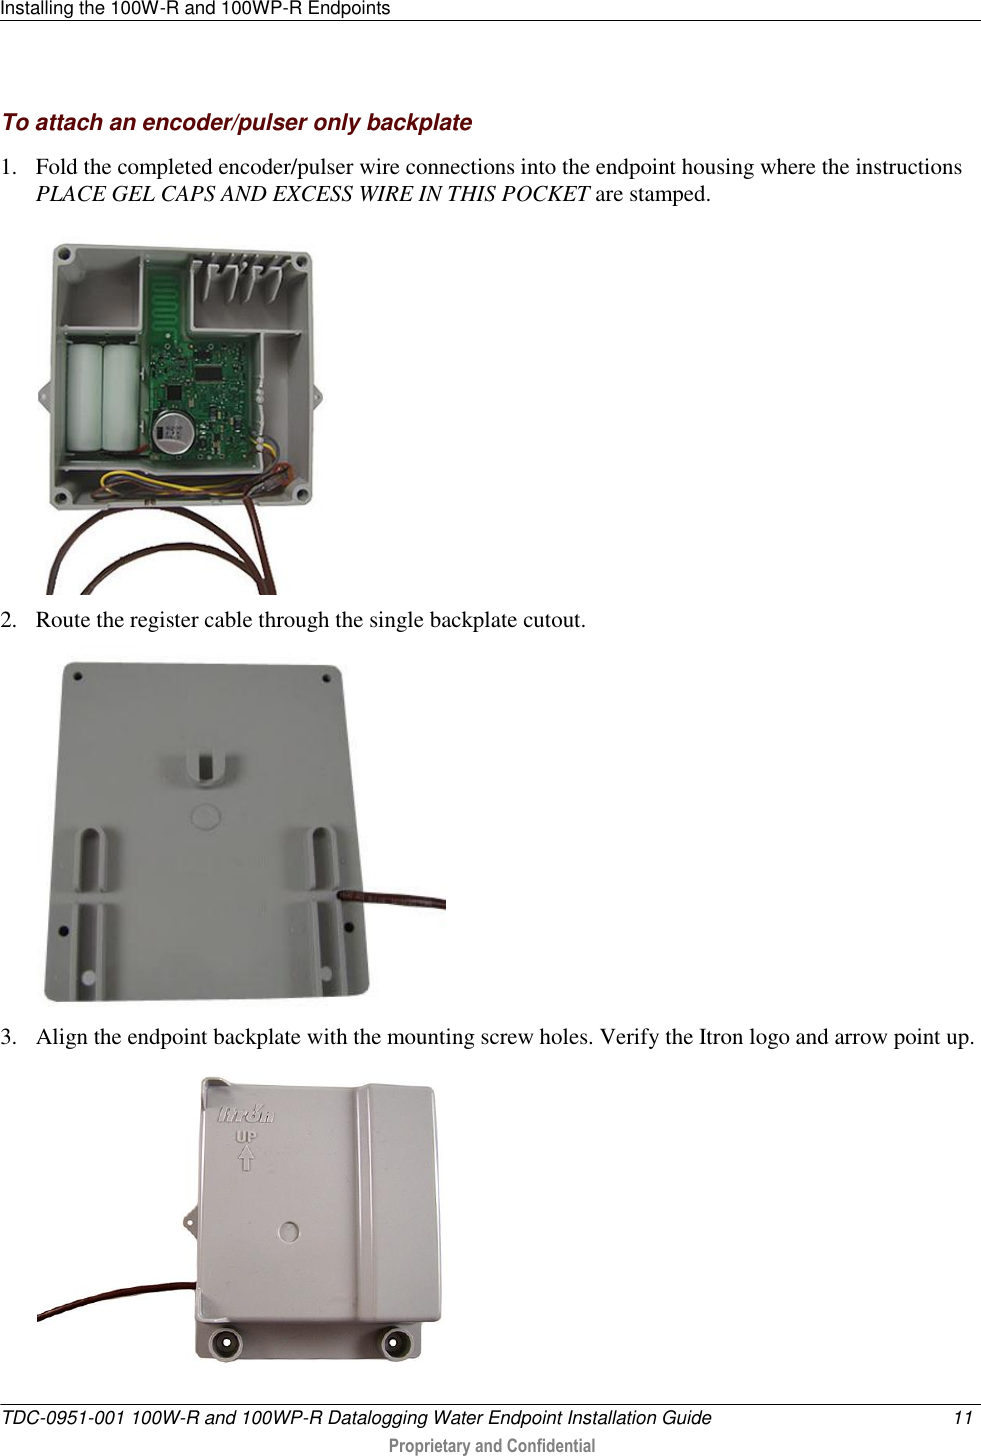 Installing the 100W-R and 100WP-R Endpoints   TDC-0951-001 100W-R and 100WP-R Datalogging Water Endpoint Installation Guide  11   Proprietary and Confidential     To attach an encoder/pulser only backplate 1. Fold the completed encoder/pulser wire connections into the endpoint housing where the instructions PLACE GEL CAPS AND EXCESS WIRE IN THIS POCKET are stamped.  2. Route the register cable through the single backplate cutout.  3. Align the endpoint backplate with the mounting screw holes. Verify the Itron logo and arrow point up.   